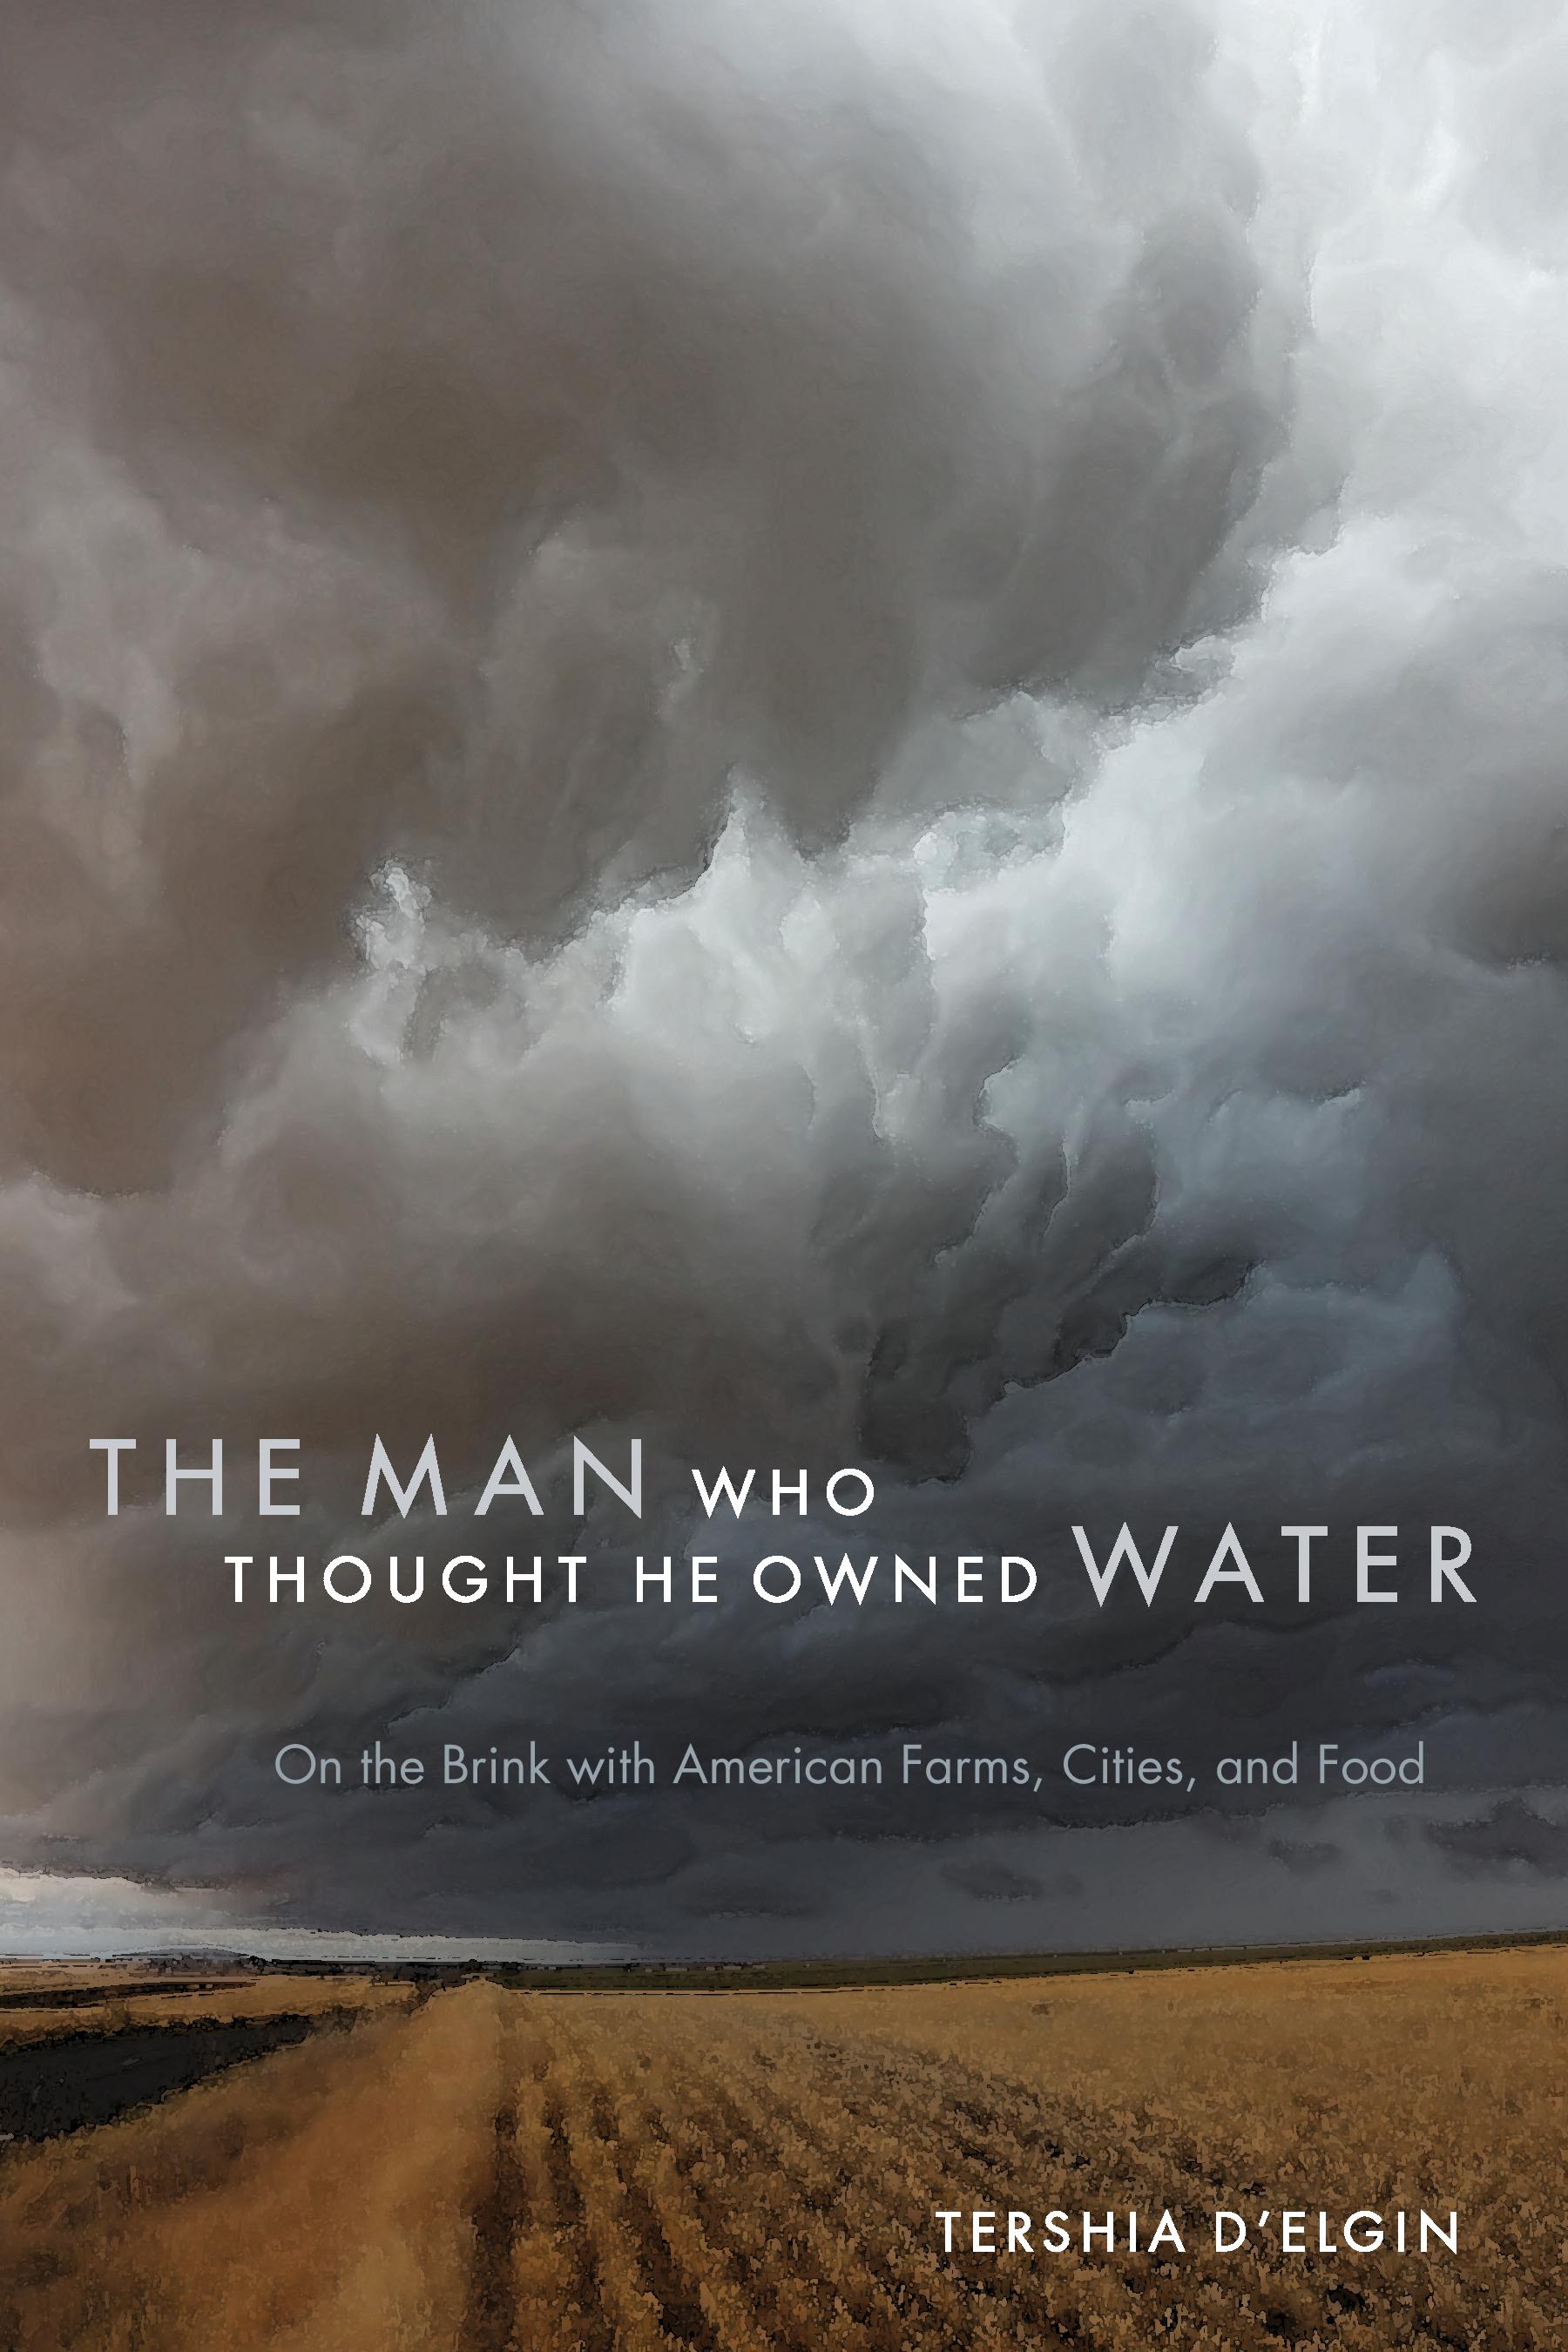 Photo: The Man Who Thought He Owned Water book cover